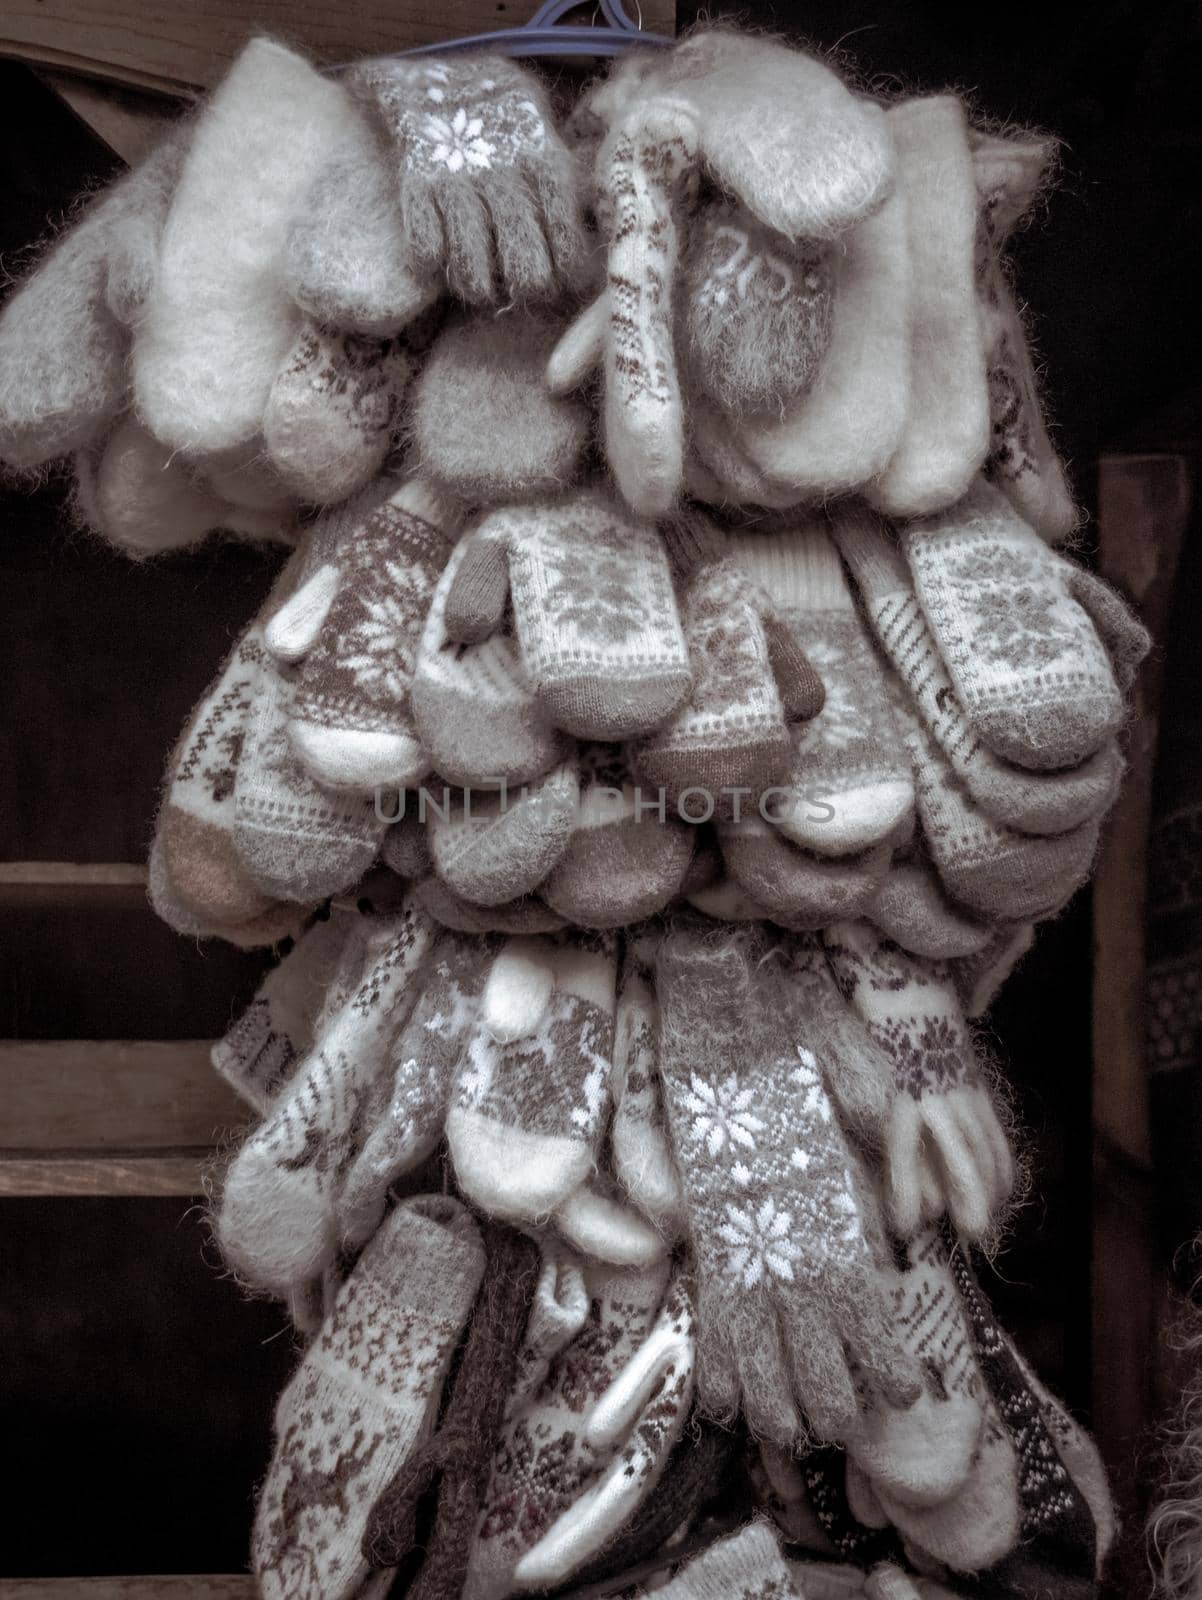 Many knitted woolen gloves and mittens in a bundle